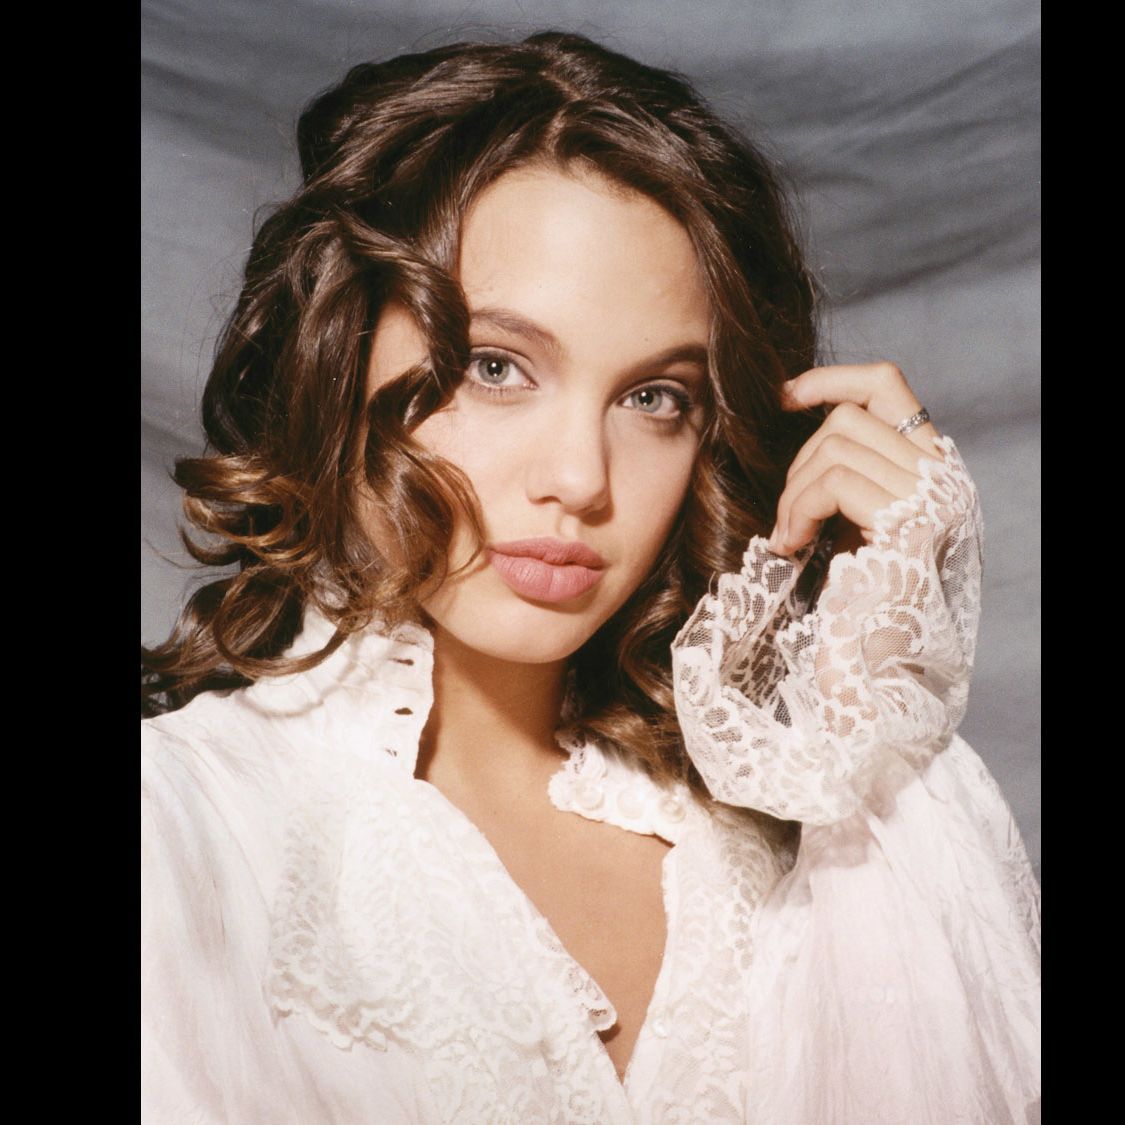 Angelina Jolie, before she was famous | CNN